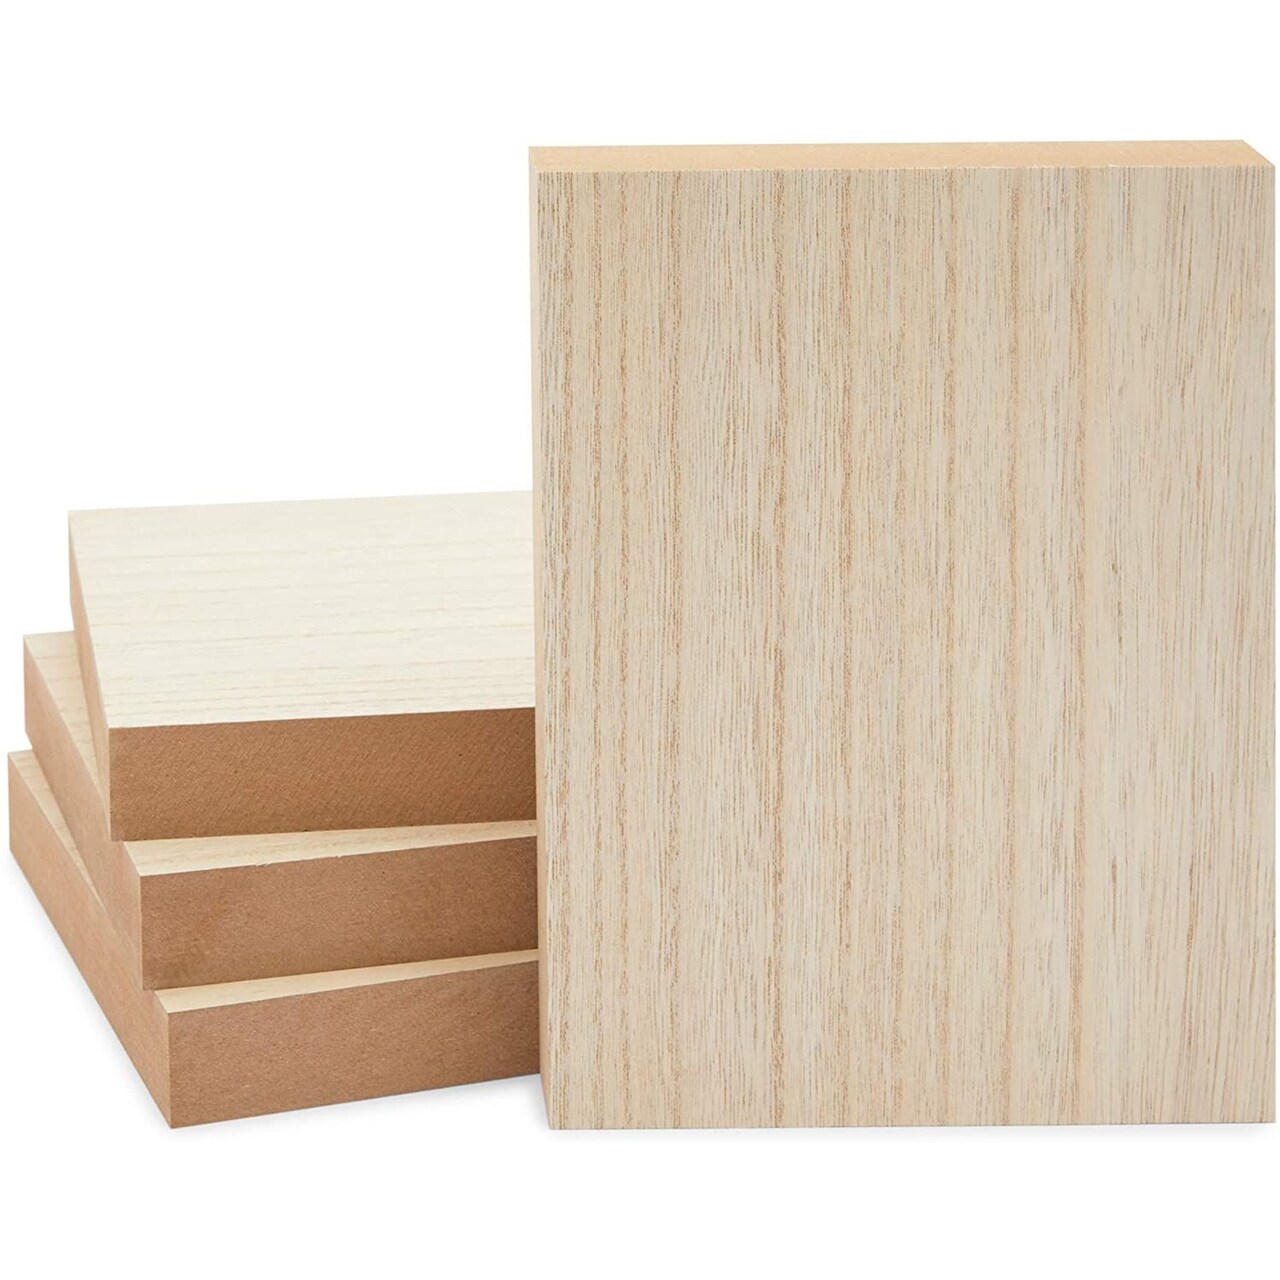 Unfinished Wood Blocks for Crafts, Painting, Wood Burning (6 x 8 x 1 in, 4  Pack)